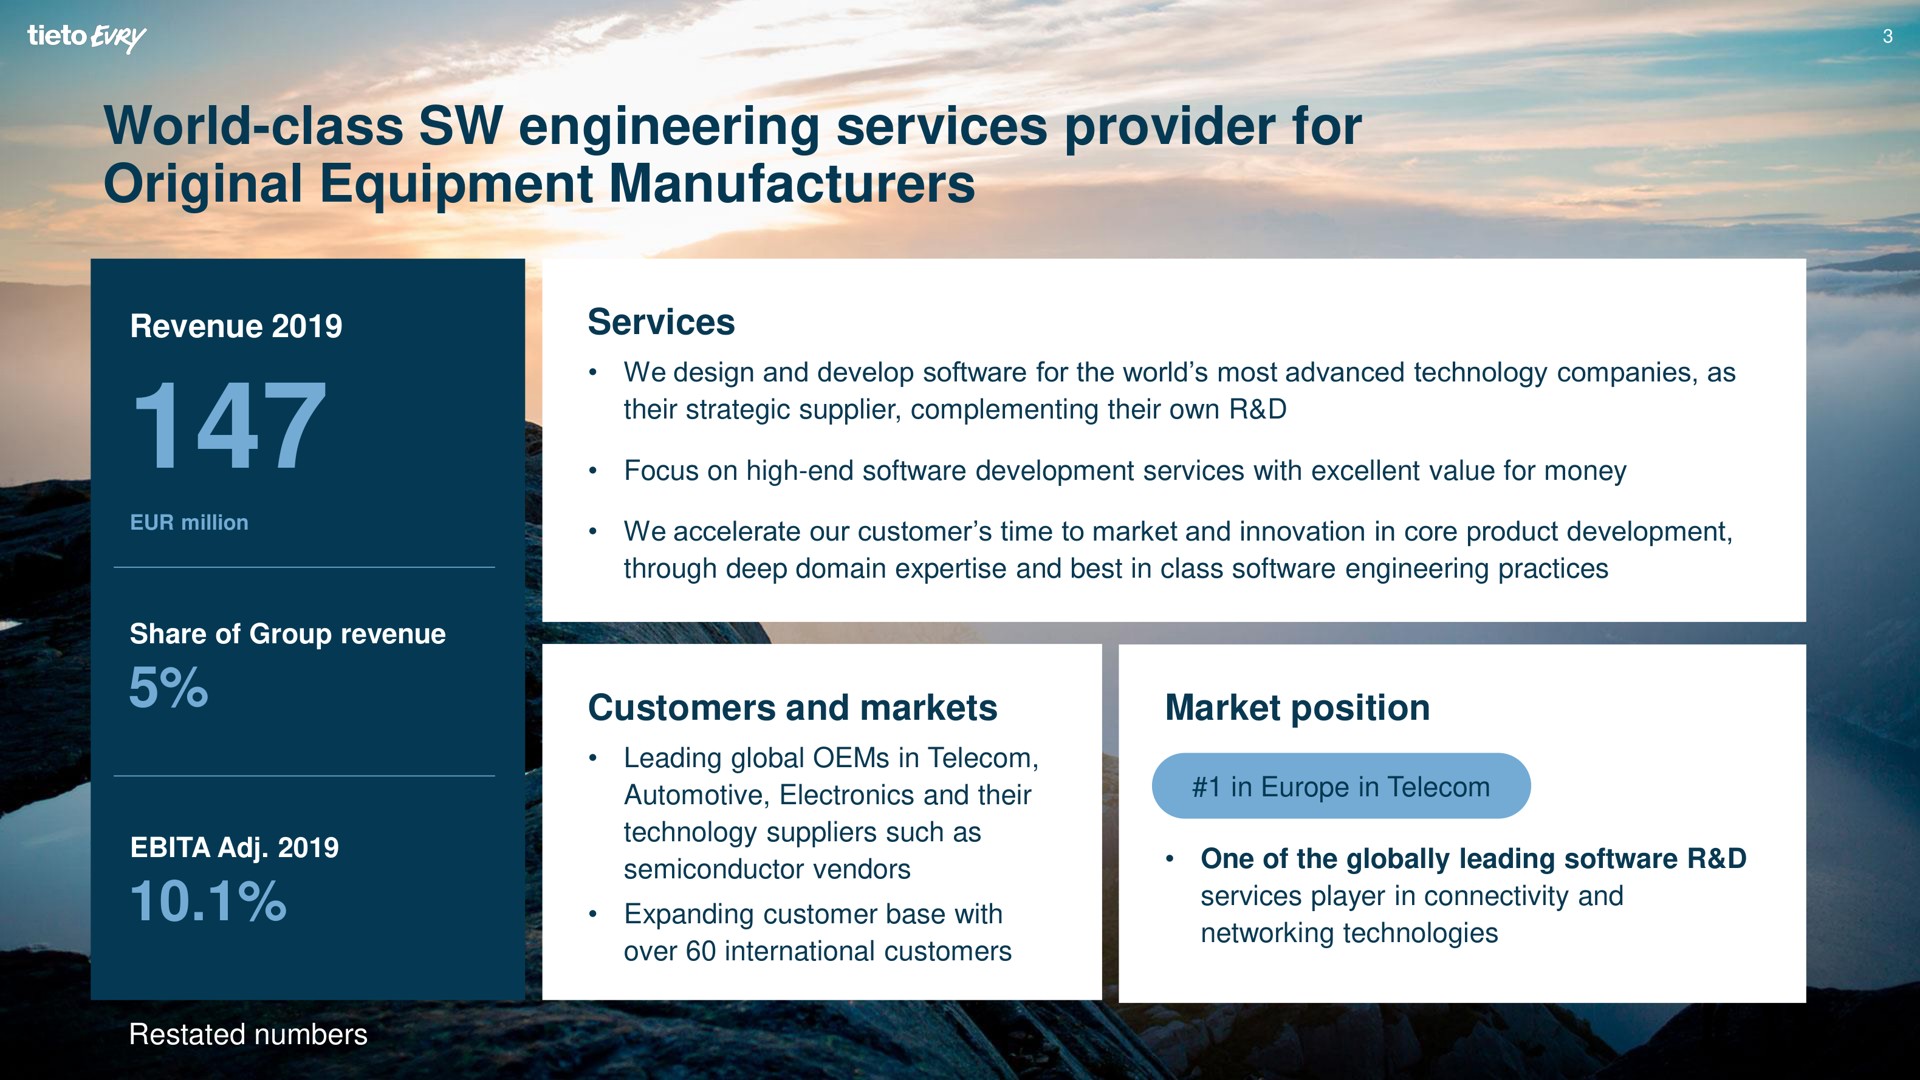 world class engineering services provider for original equipment manufacturers | Tietoevry